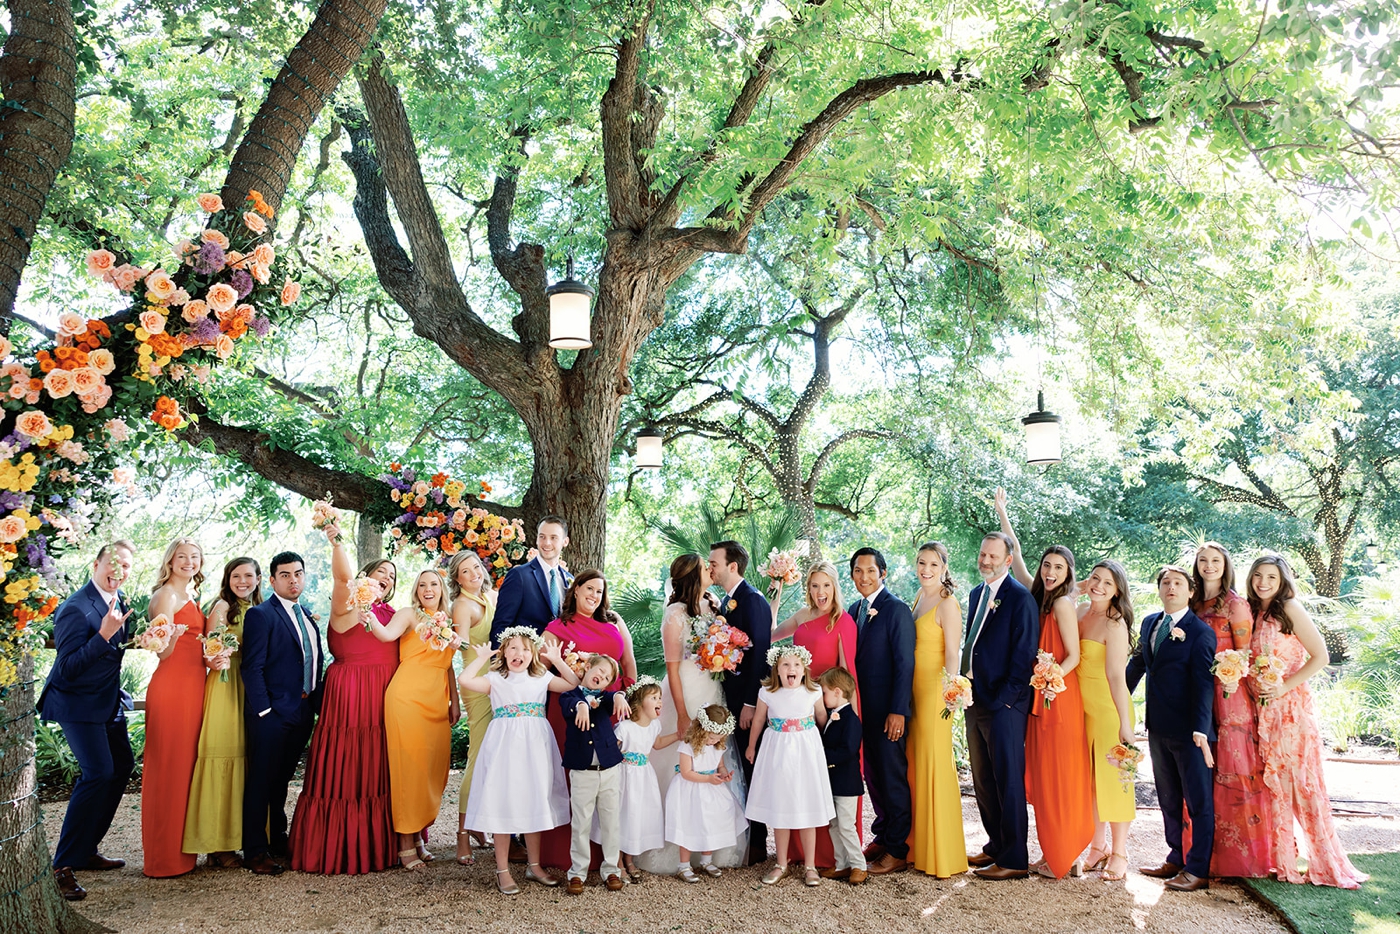 Colorful bridal party in navy blue suits and pink, orange, and yellow gowns